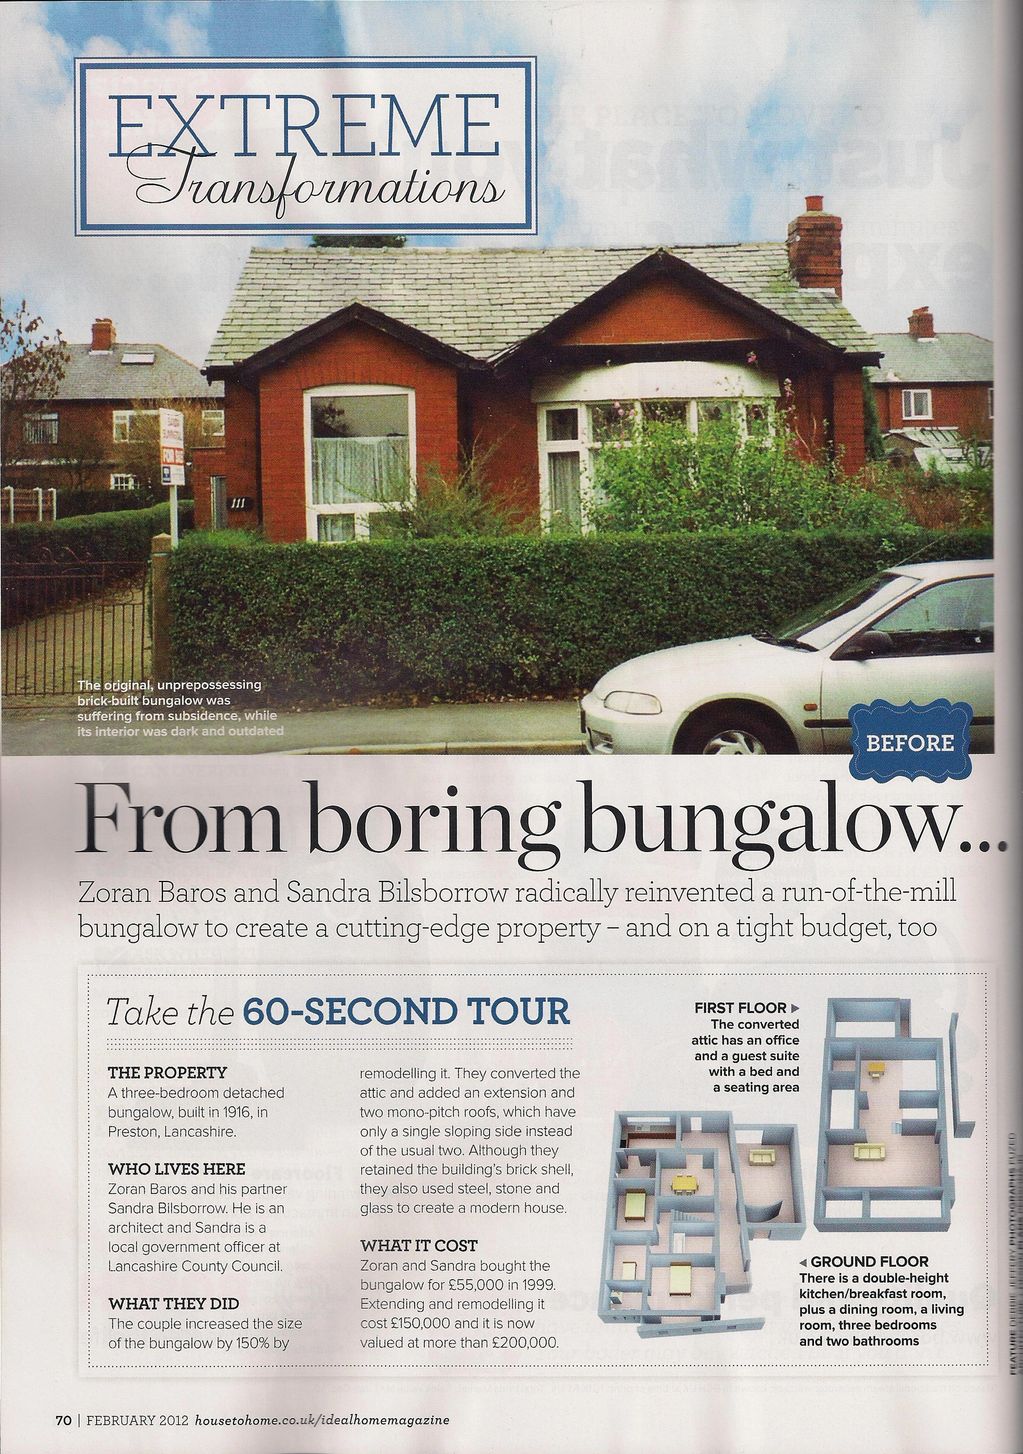 ideal home magazine article on FuZED Architects transformation of a boring brick bungalow.